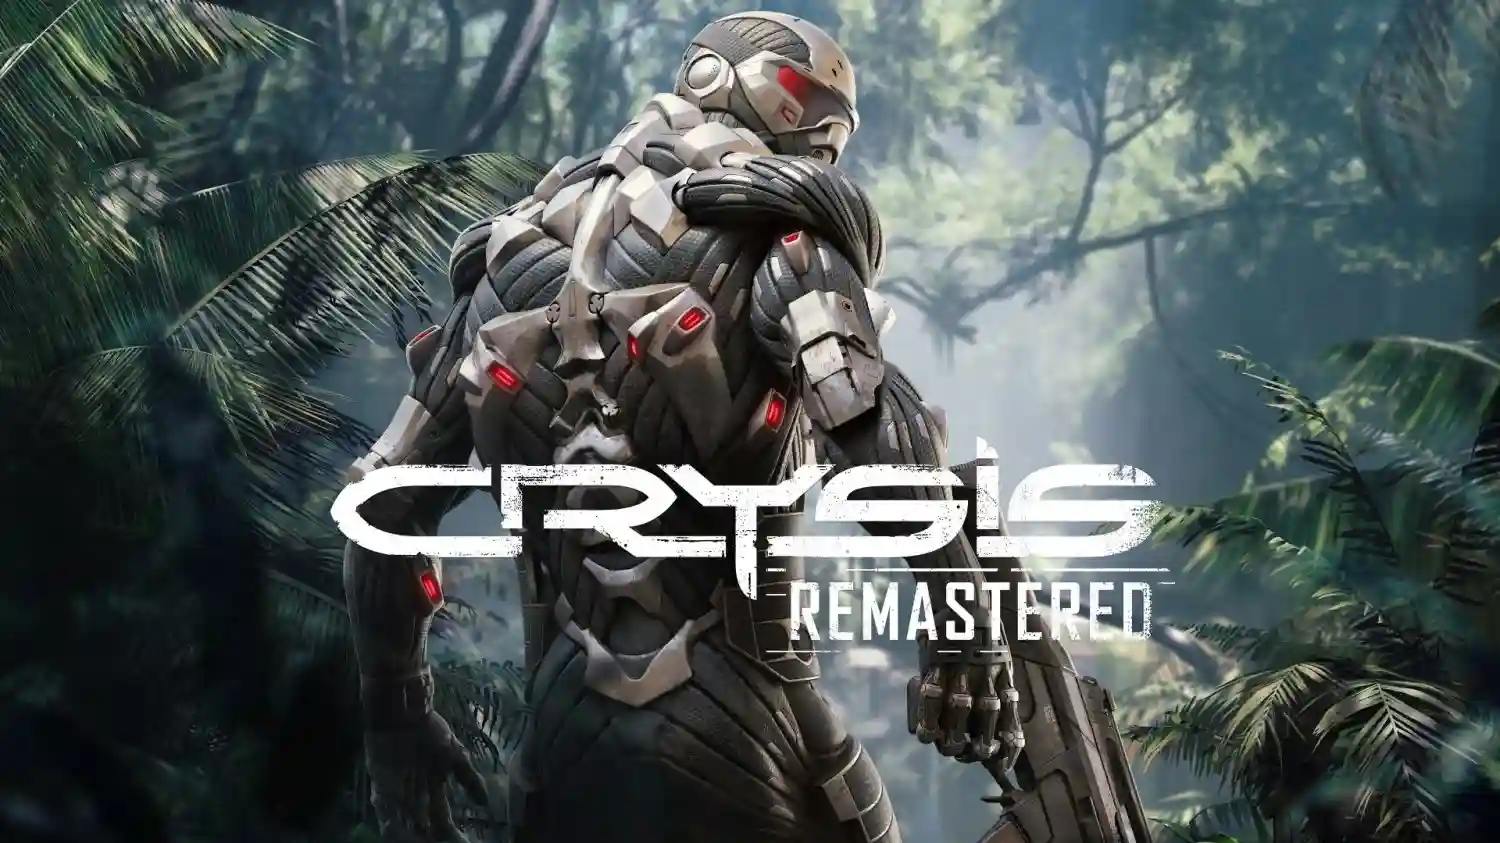 Crysis Remastered announces its minimum and recommended PC requirements